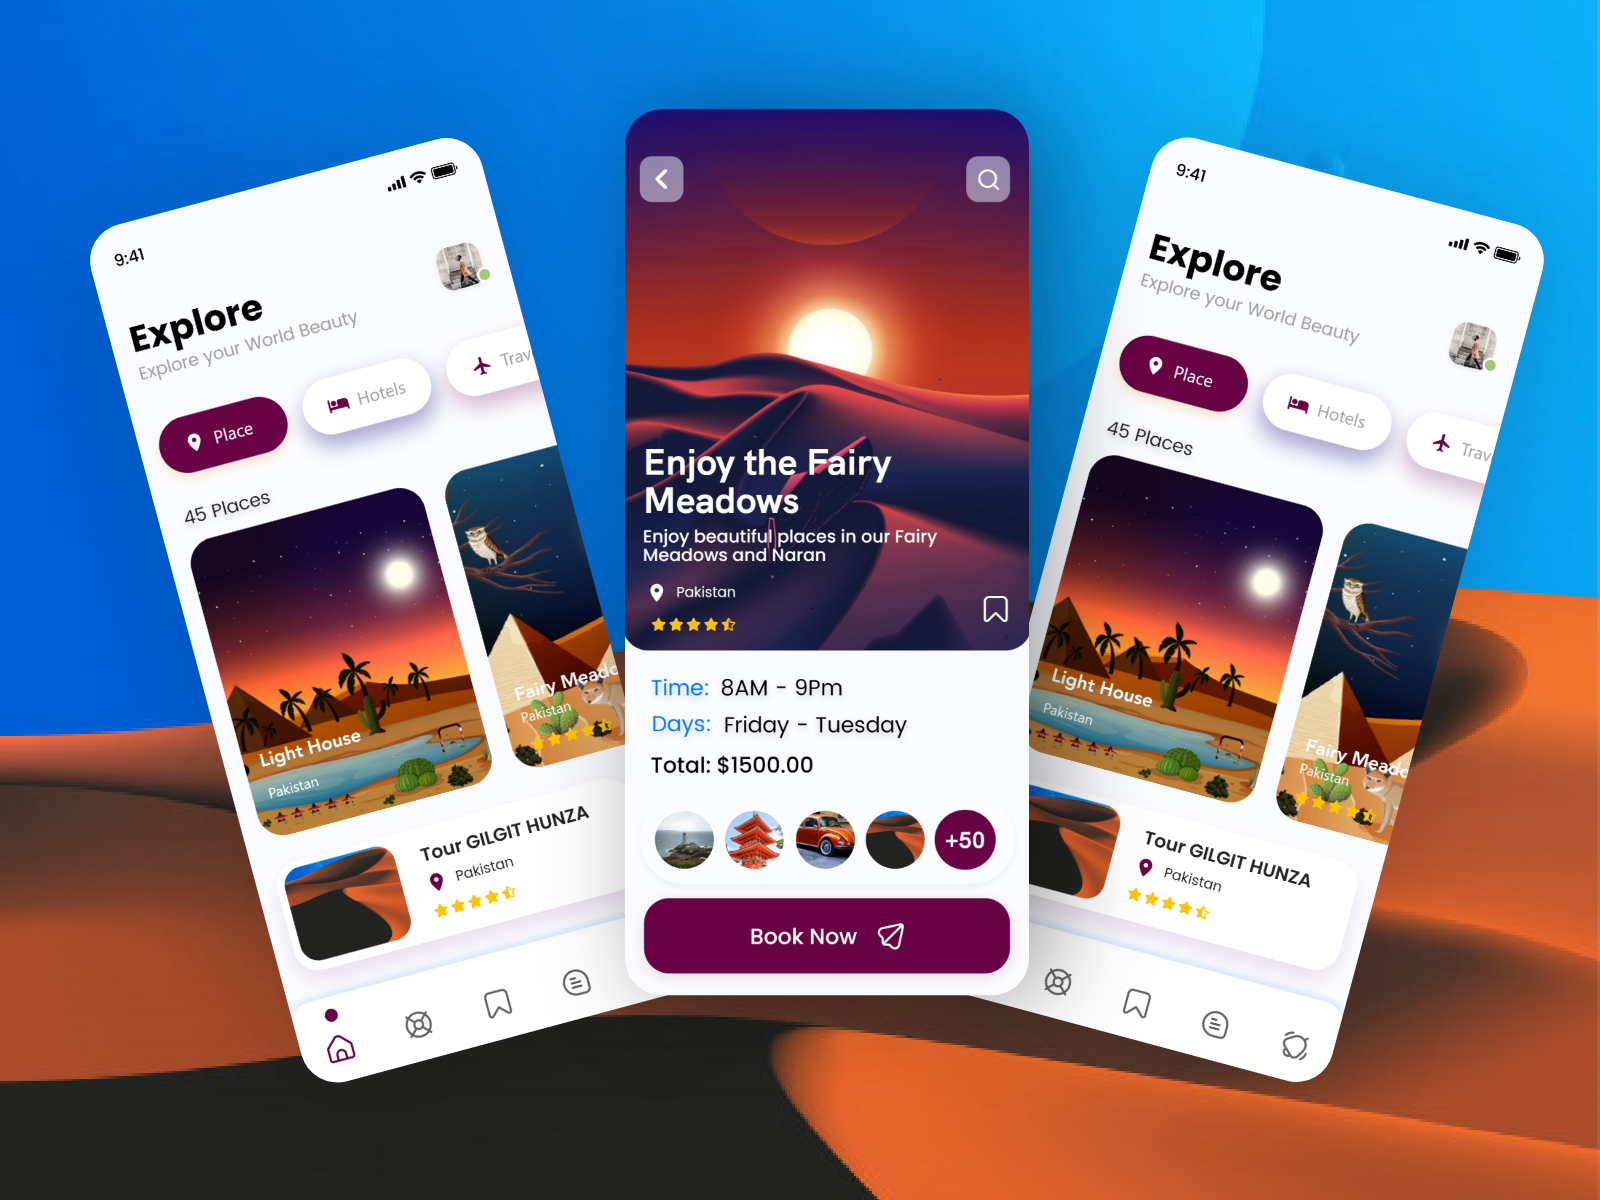 Travel App V Travel App UI Design Concept Hotel Booking App By Imran Chaudhary On Dribbble